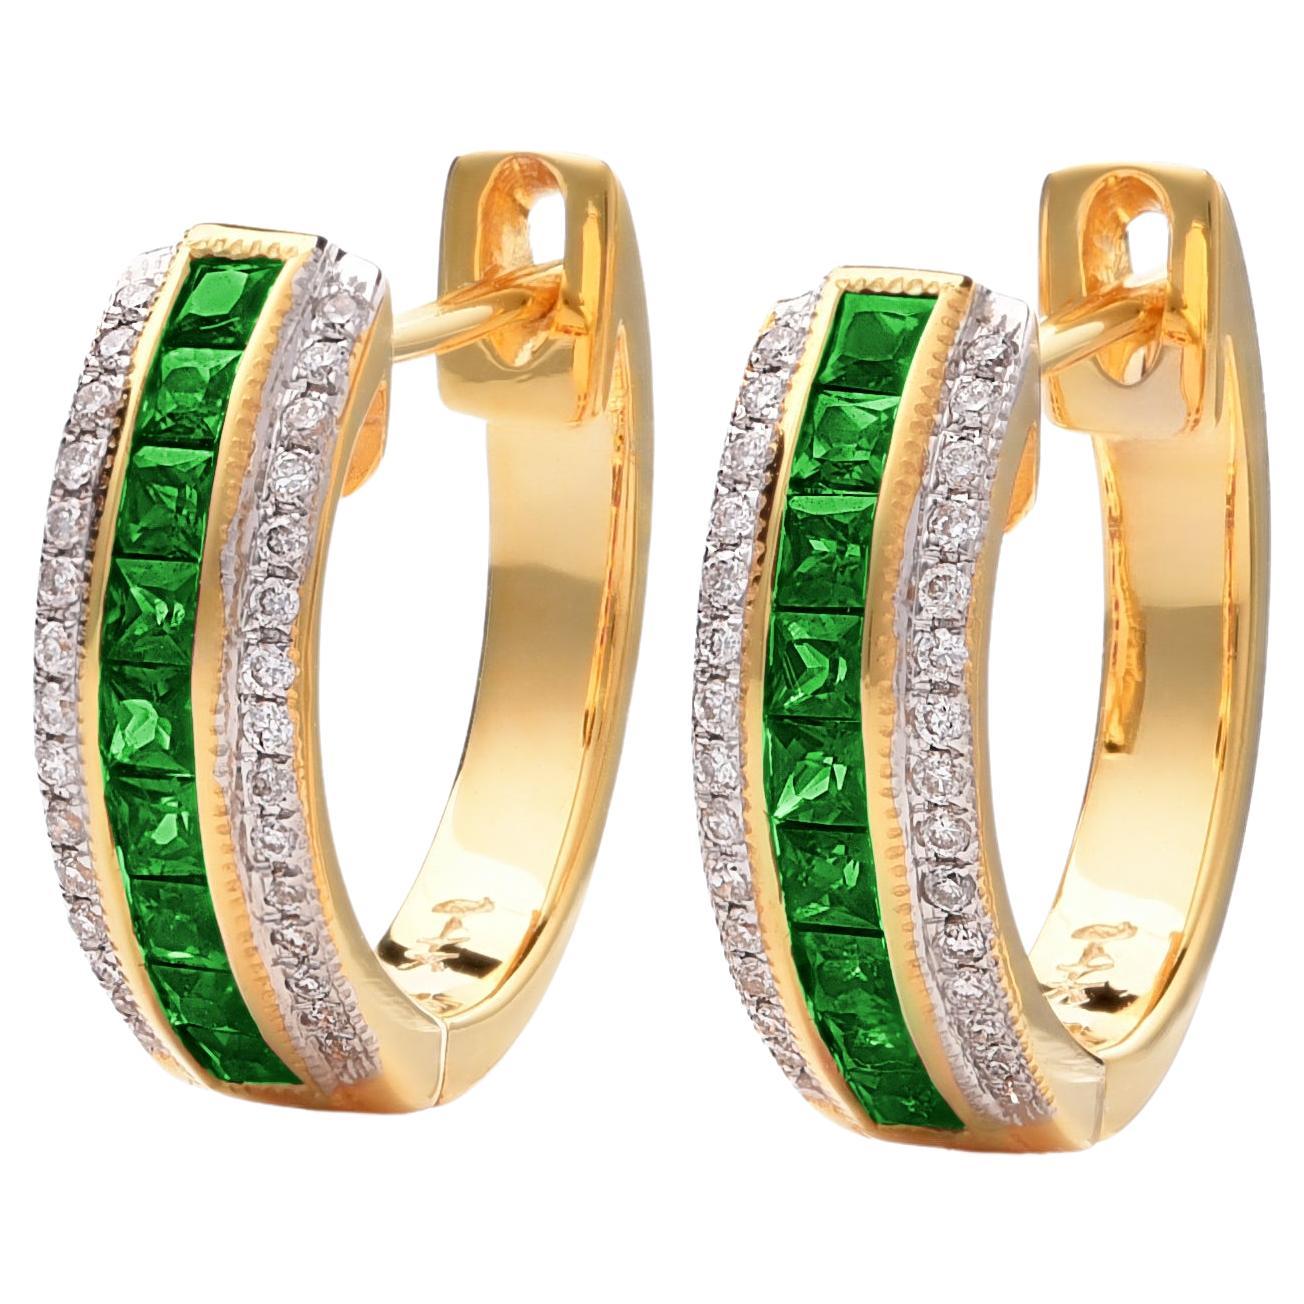 Natural Tsavorite 0.58 Carats set in 14K Yellow Gold Earrings with Diamonds